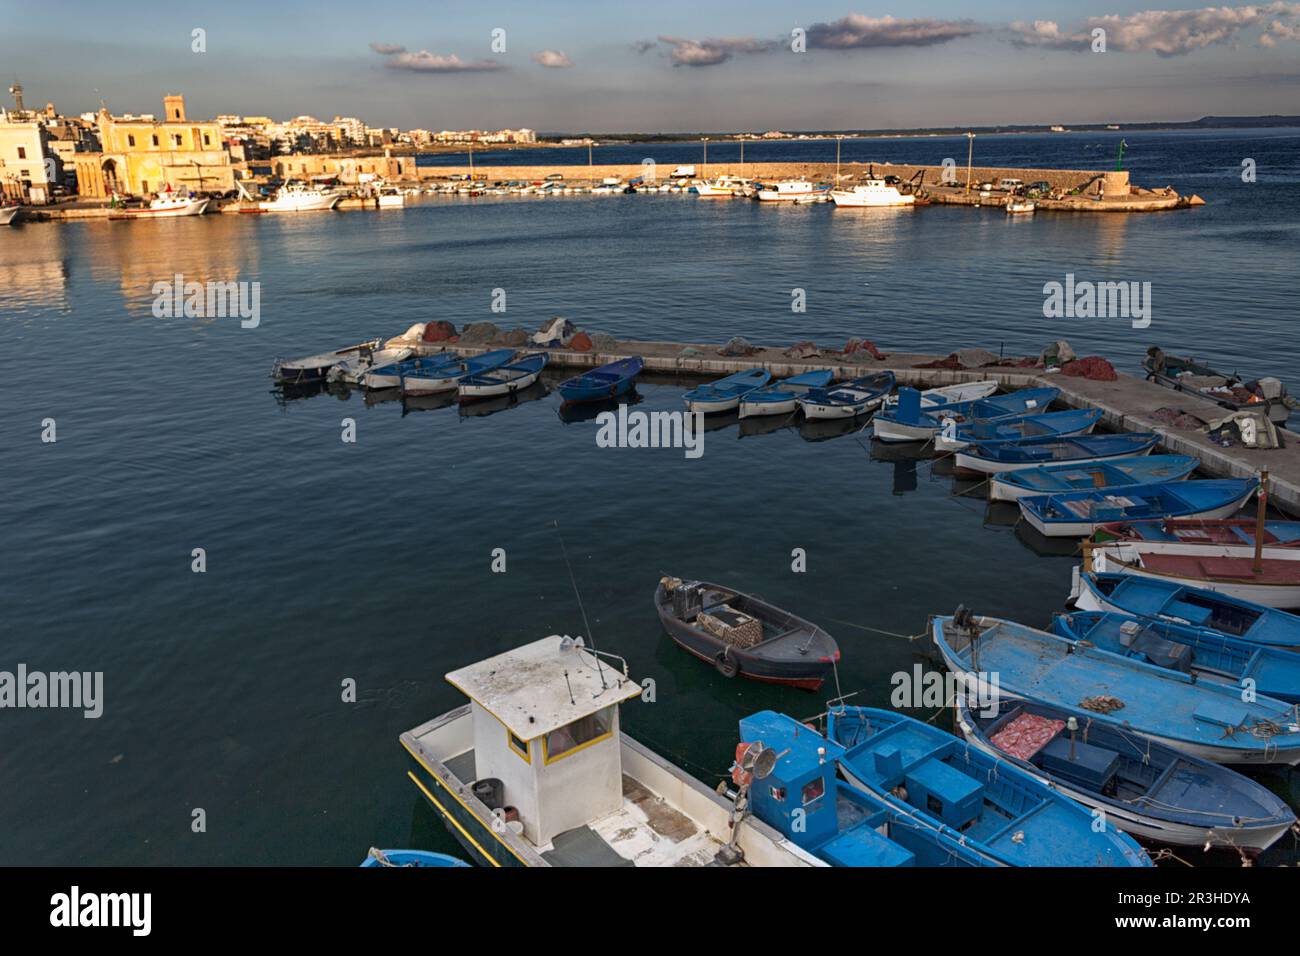 Bay between Rivelino and Canneto in Gallipoli (Le) Stock Photo